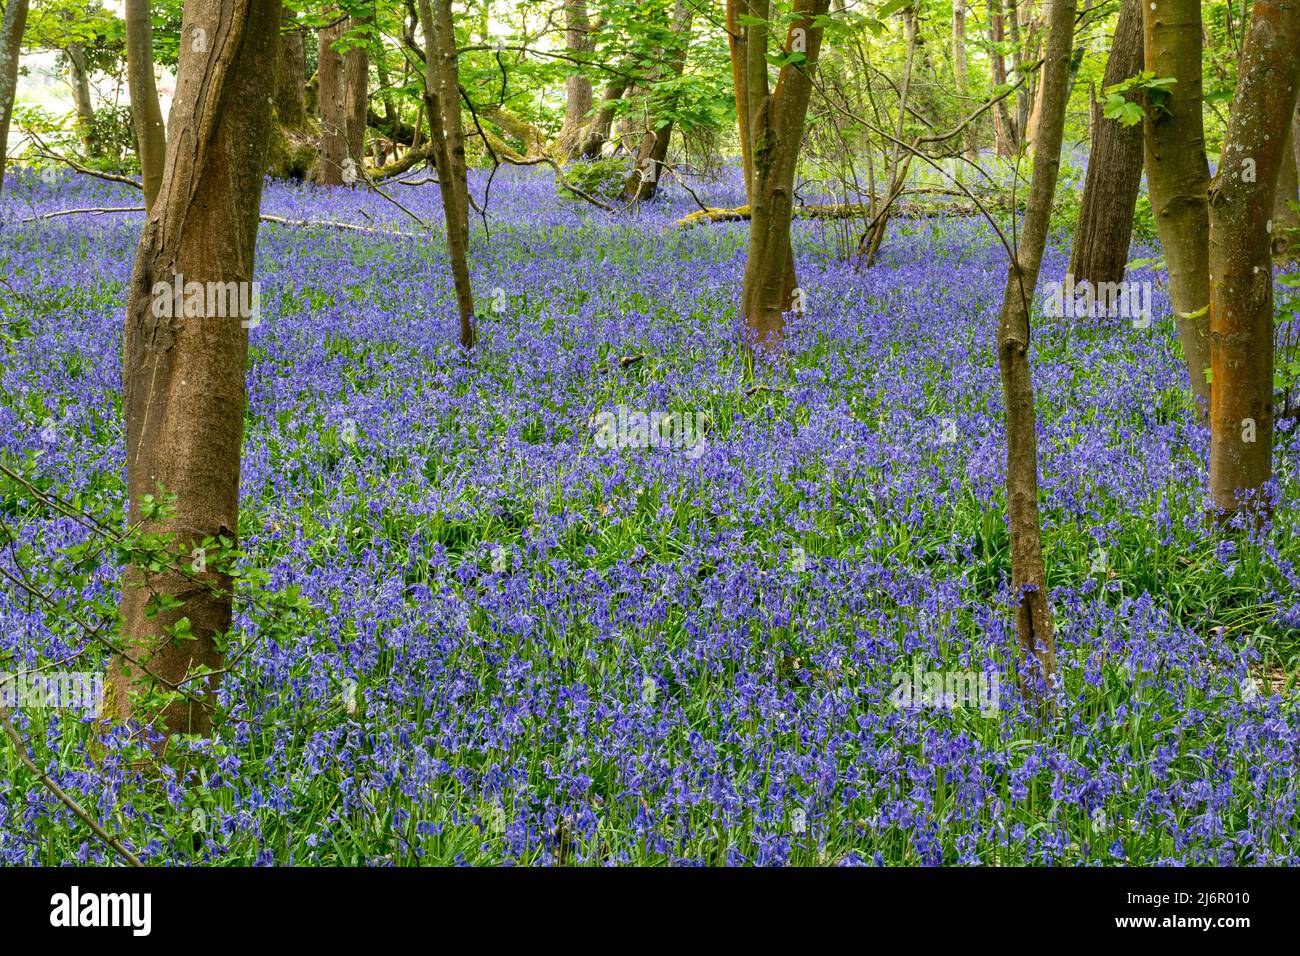 Bluebells at Lower Eversley Copse, Hampshire, England, UK, during May. Bluebell woods, Hyacinthoides non-scripta. Stock Photo